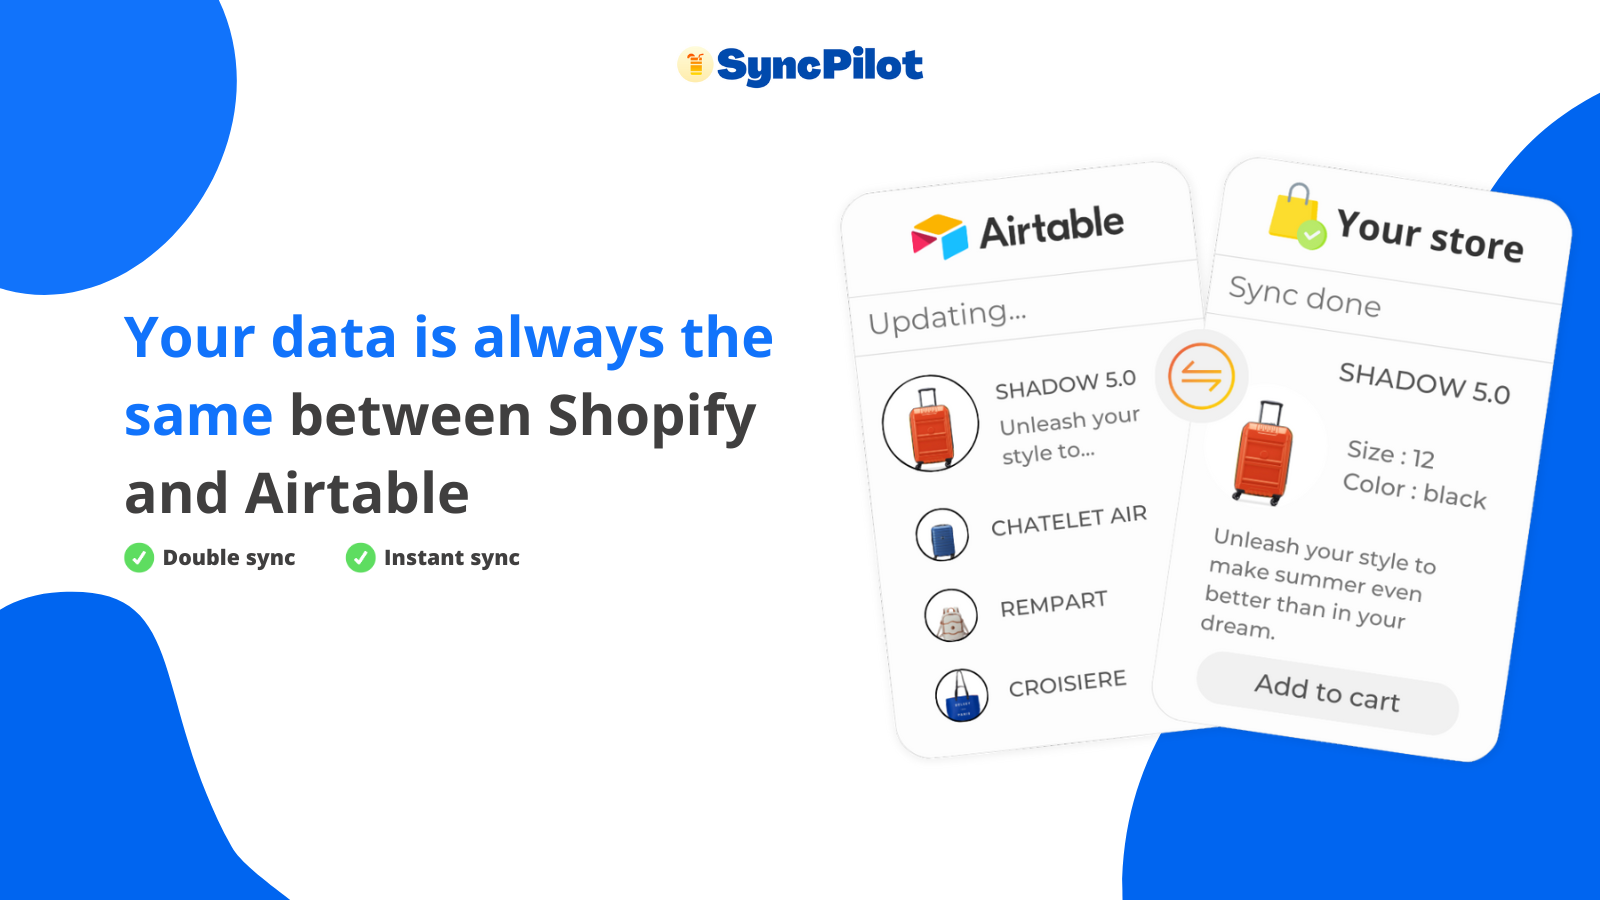 Double and instant sync between Airtable and Shopify